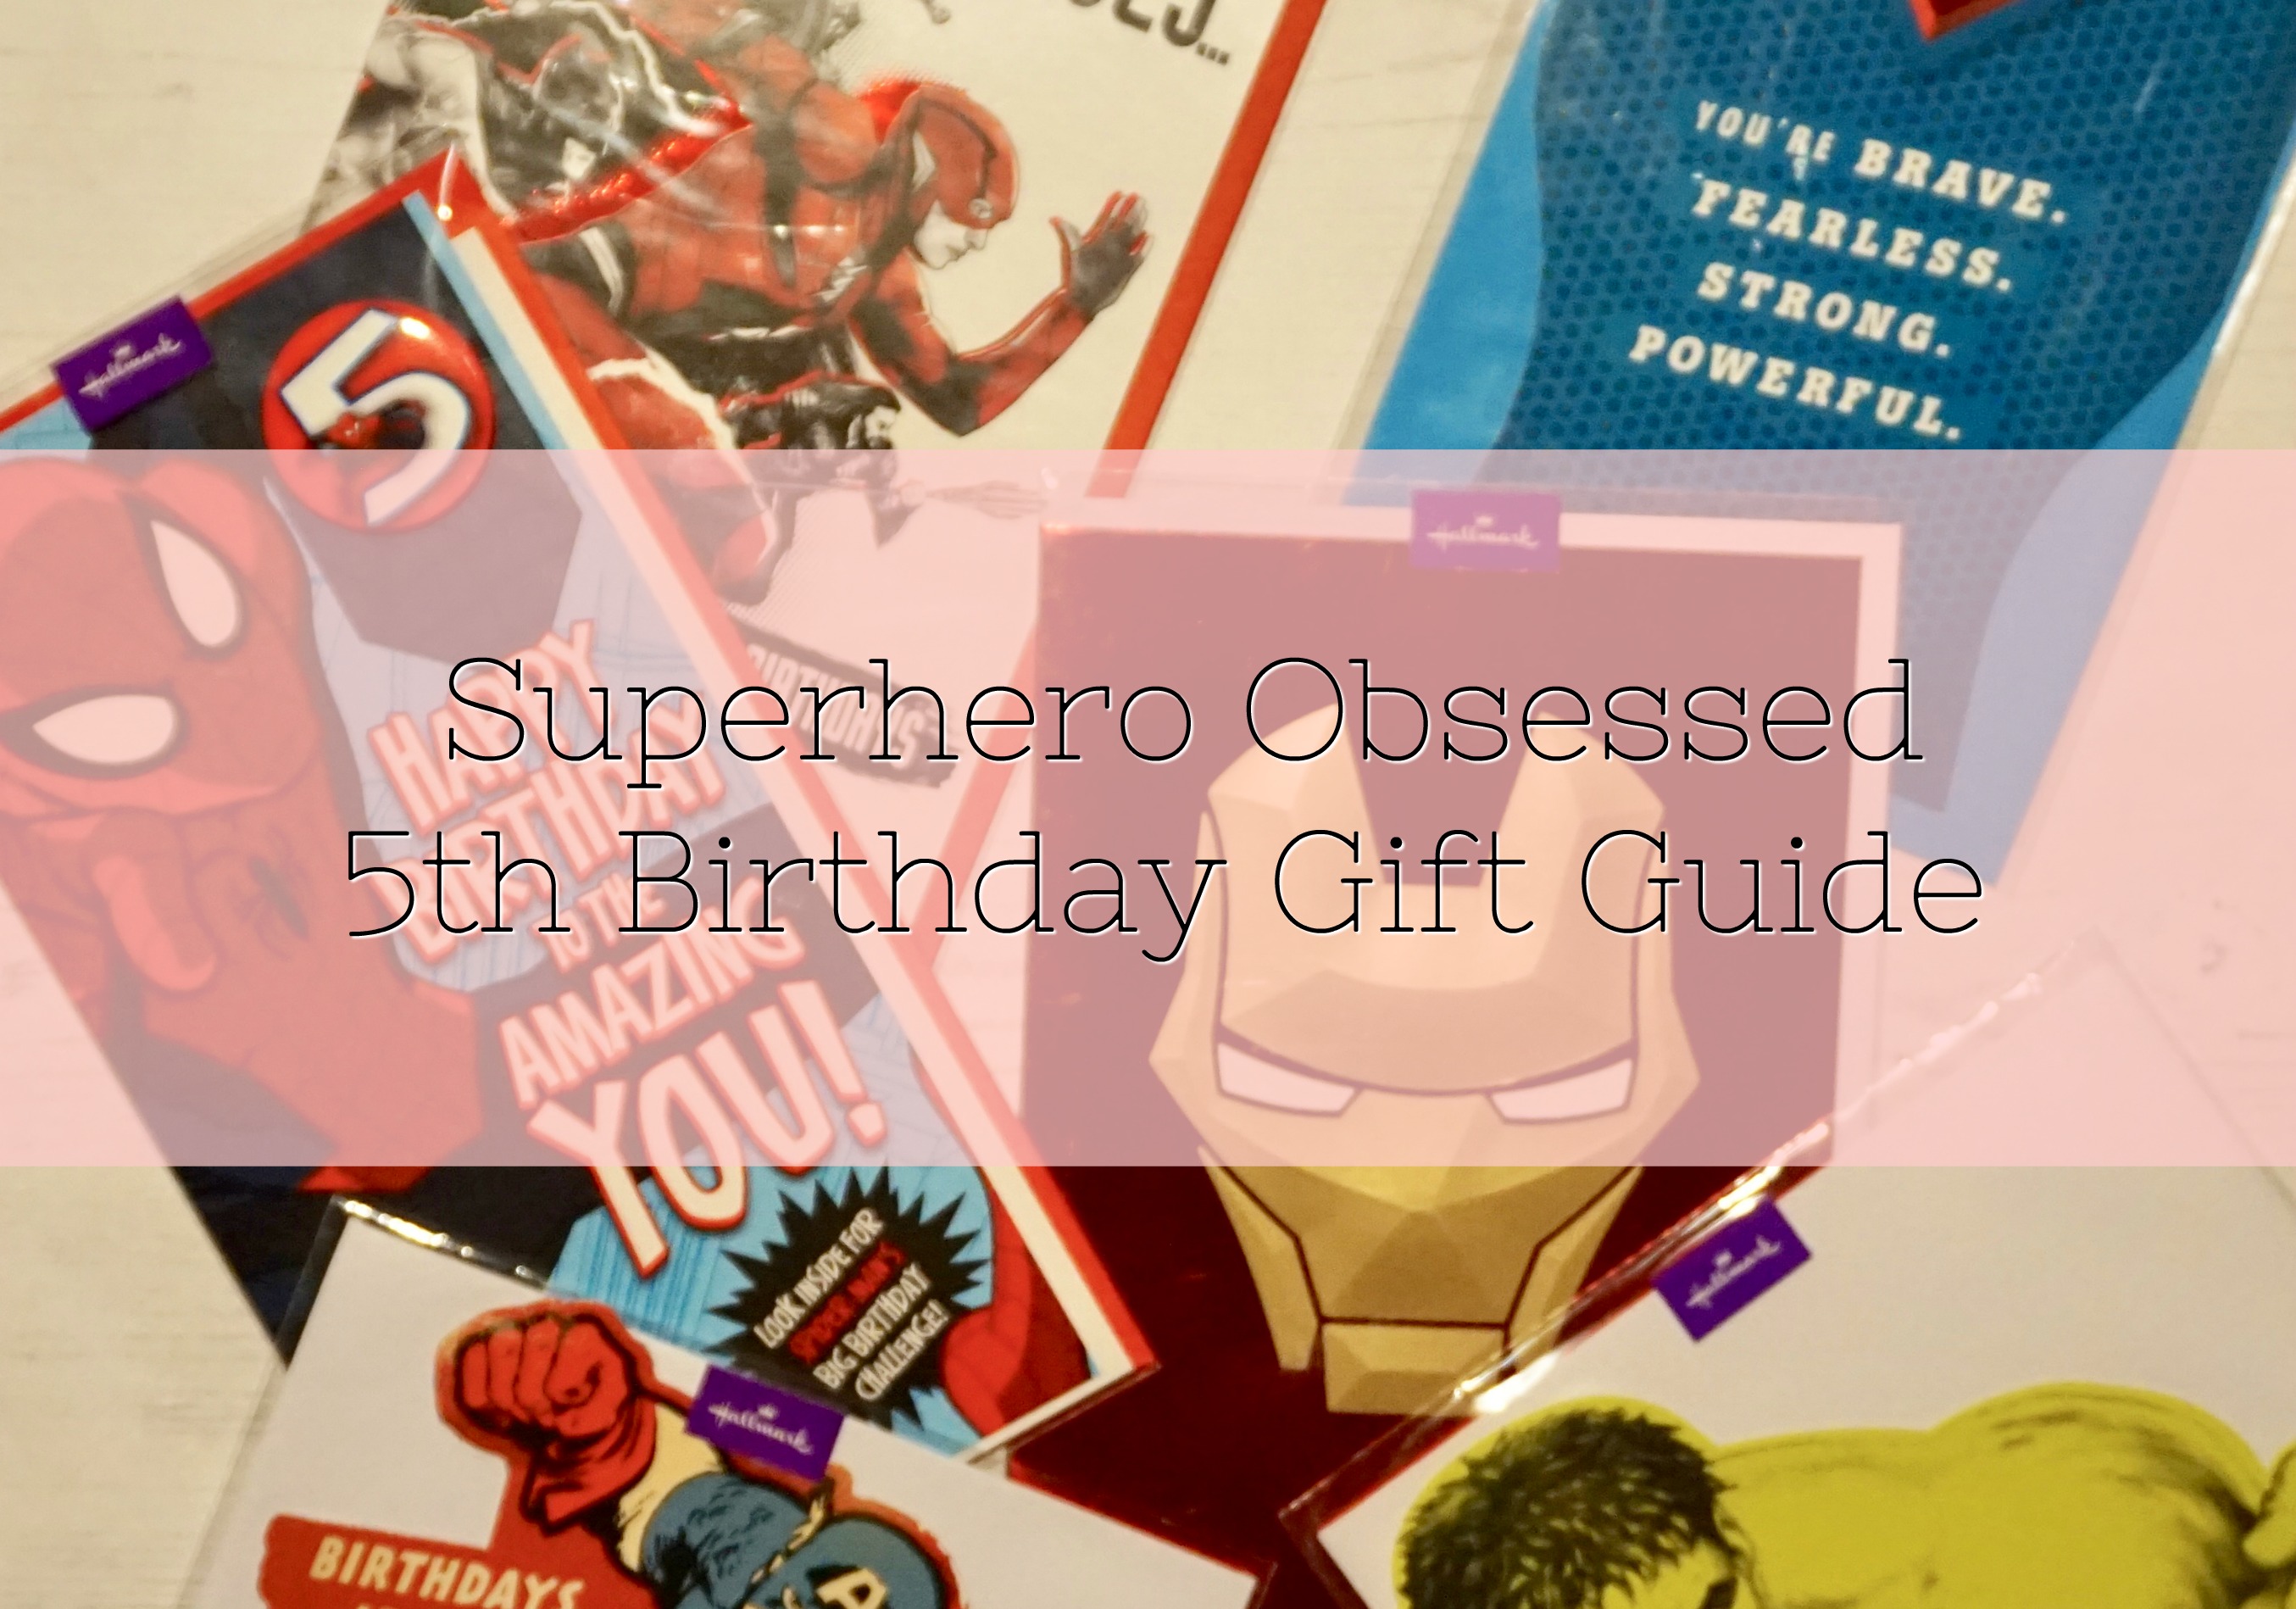 Superhero Obsessed 5th Birthday Gift Guide